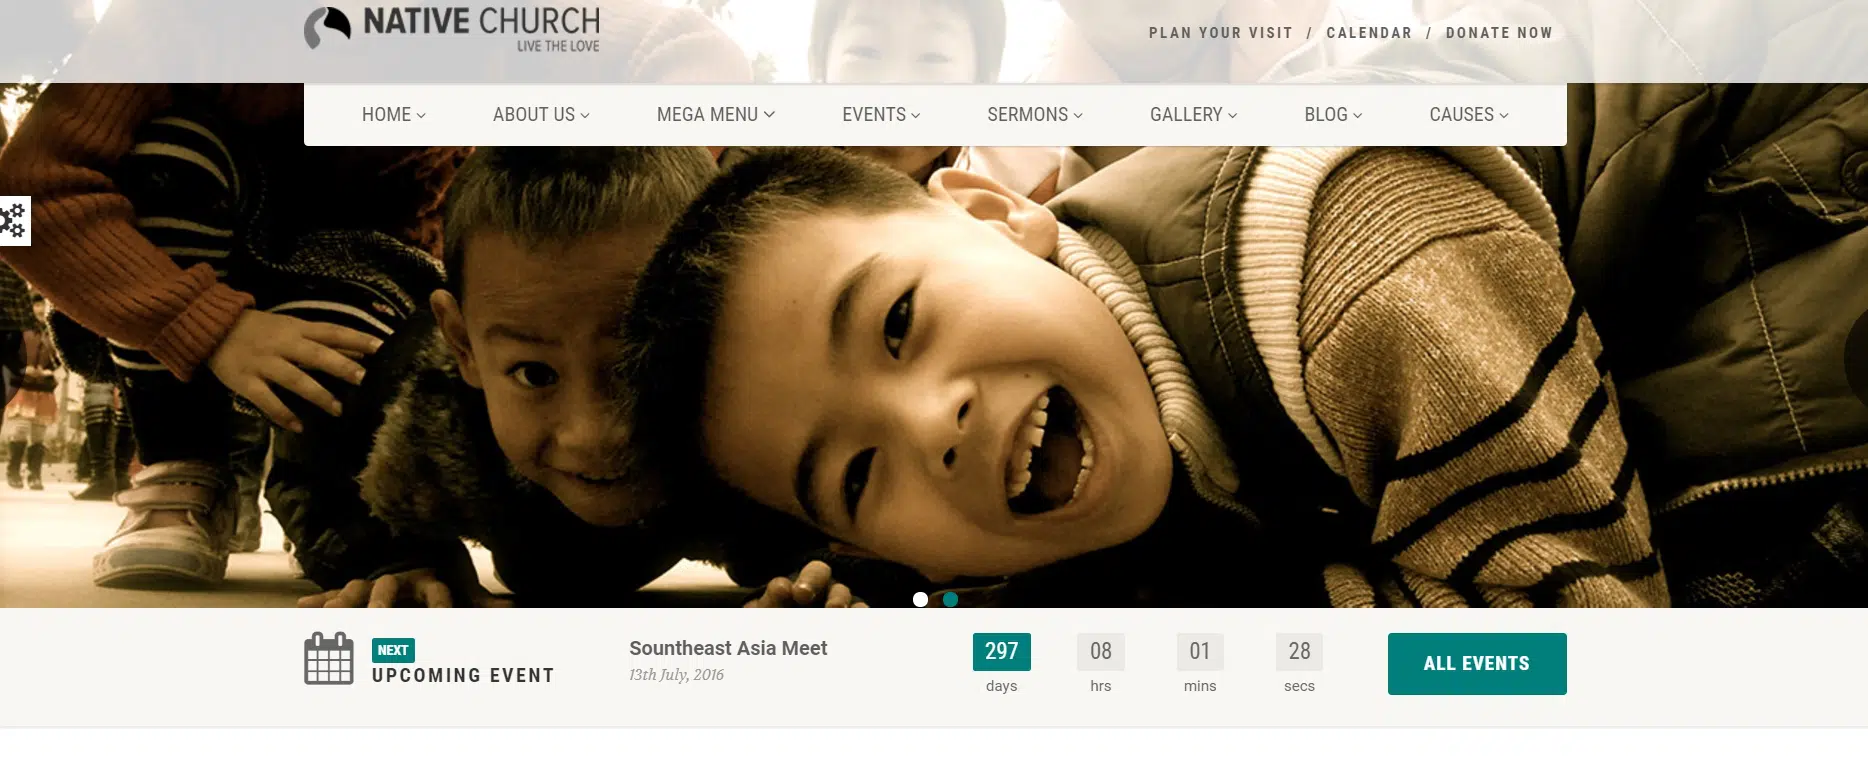 NativeChurch religious website template